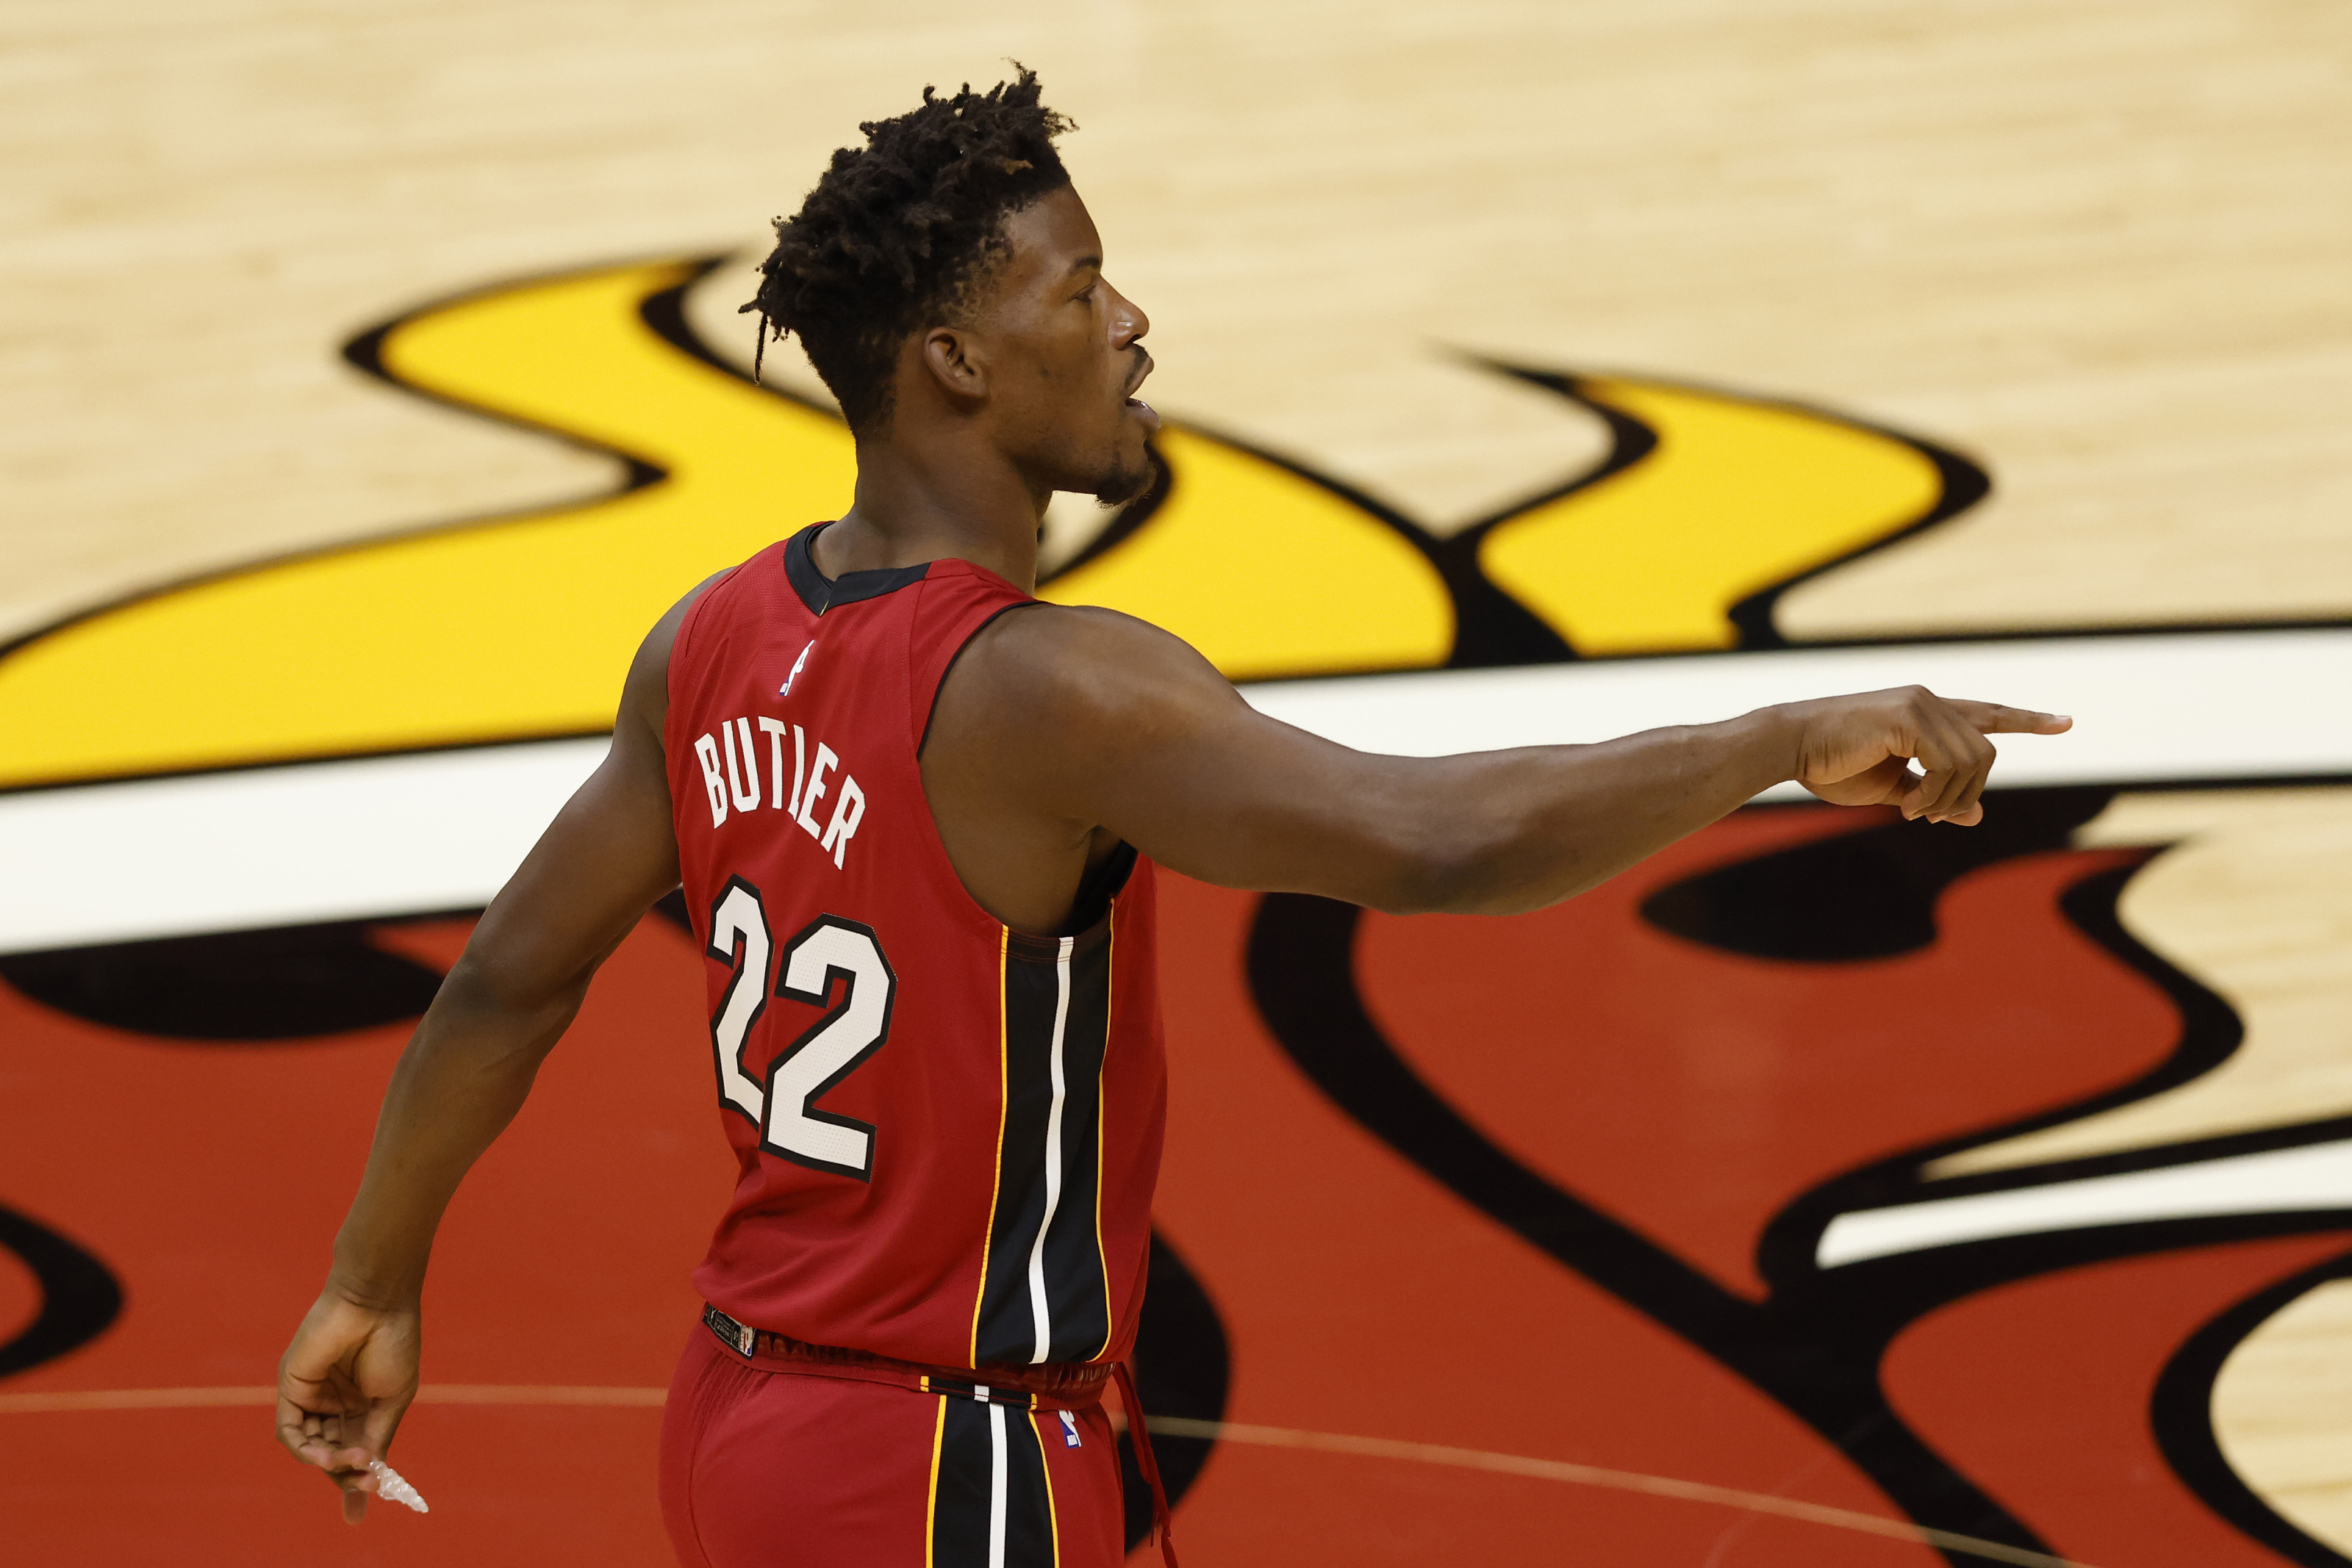 Meet the Fittest Man in the NBA, Miami Heat Star Jimmy Butler